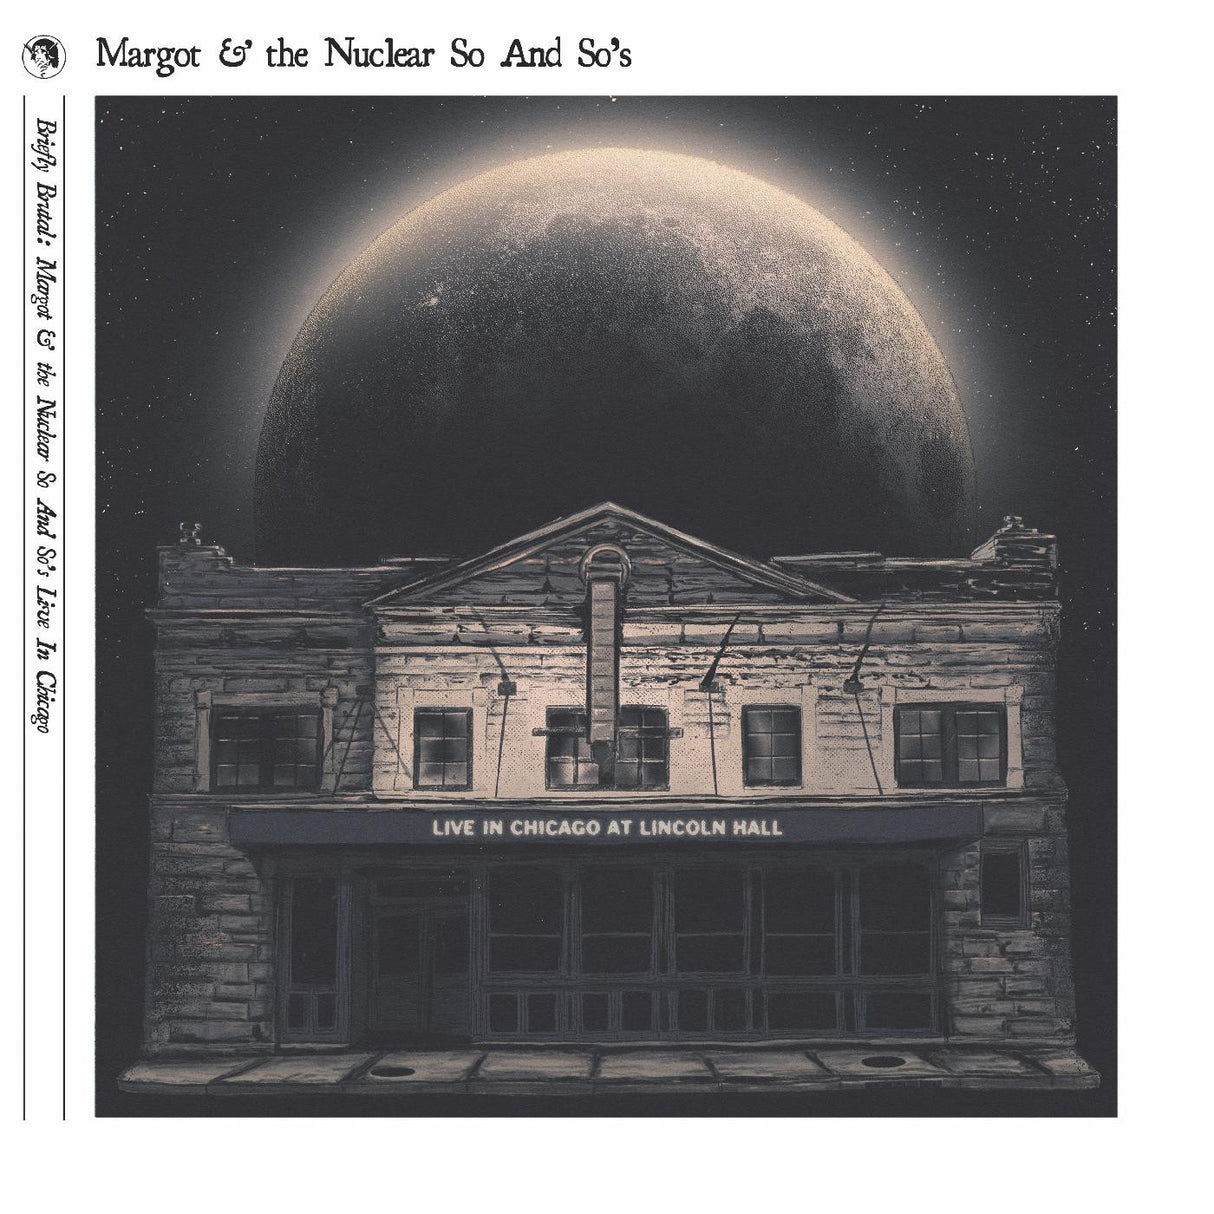 Margot & the Nuclear So And So's - Briefly Brutal - Live In Chicago [Deluxe] [Vinyl]